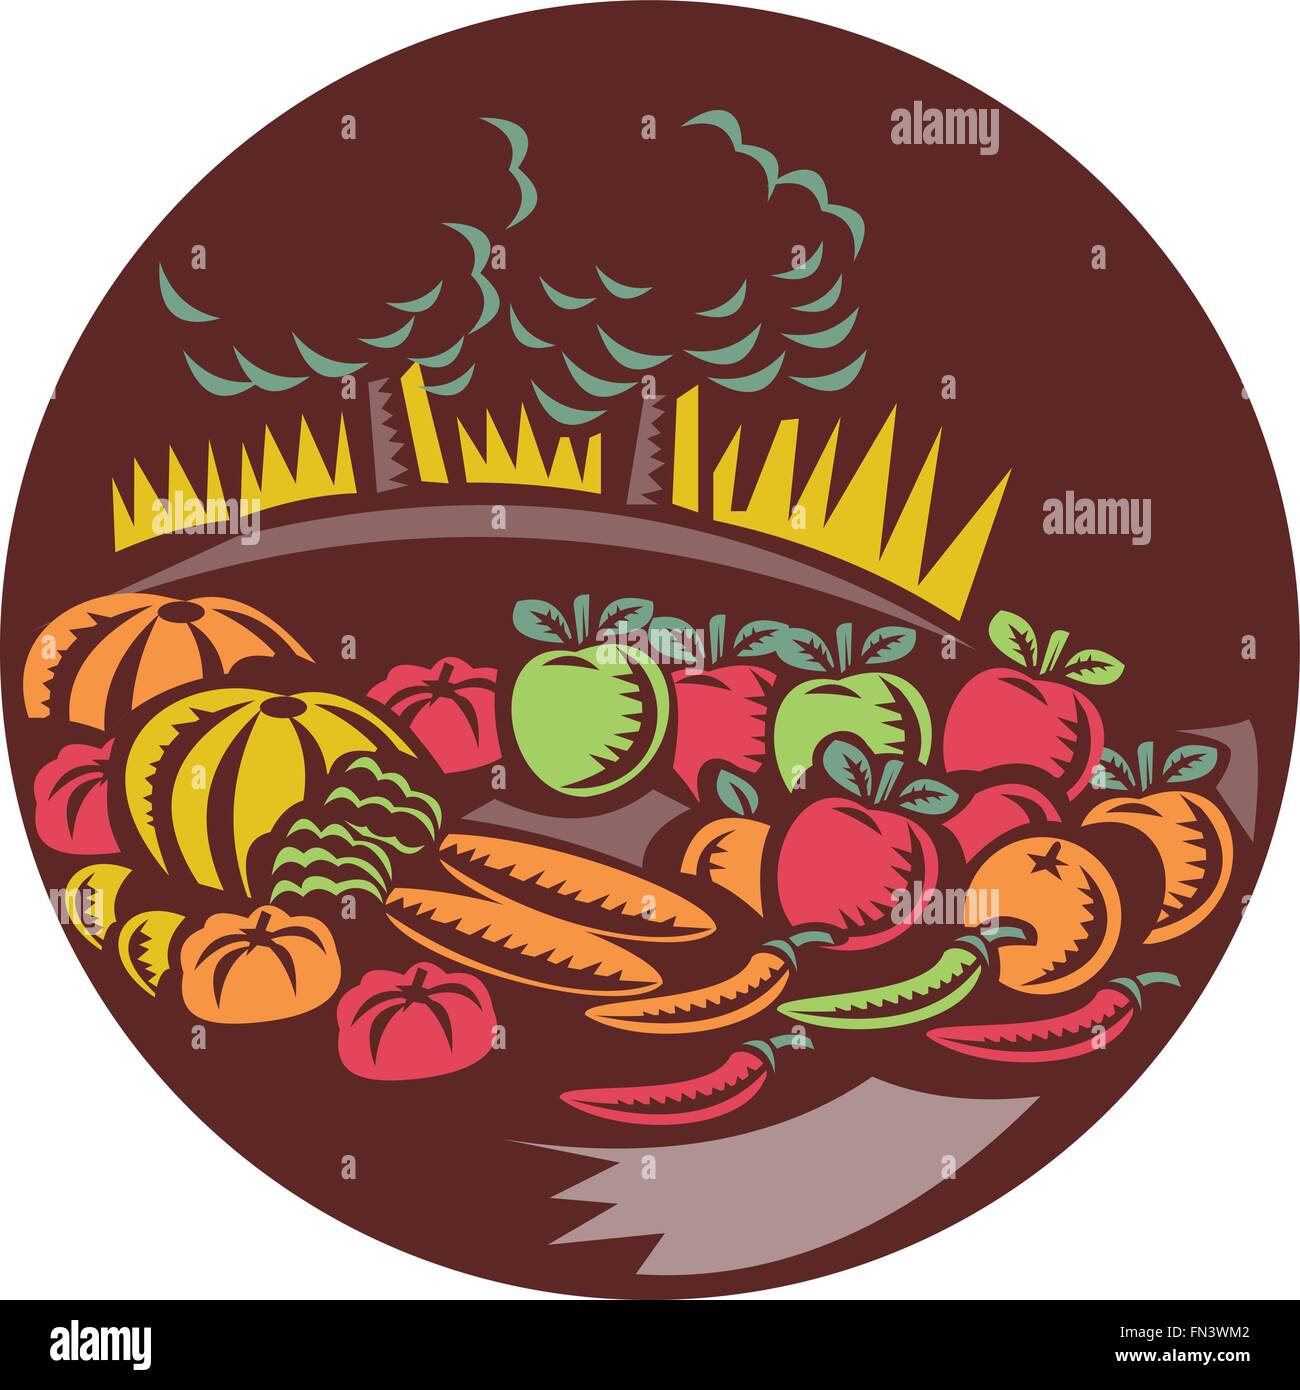 Illustration of orchard crops harvest fruit vegetable set inside circle with trees farm in the background done in retro woocut style. Stock Vector